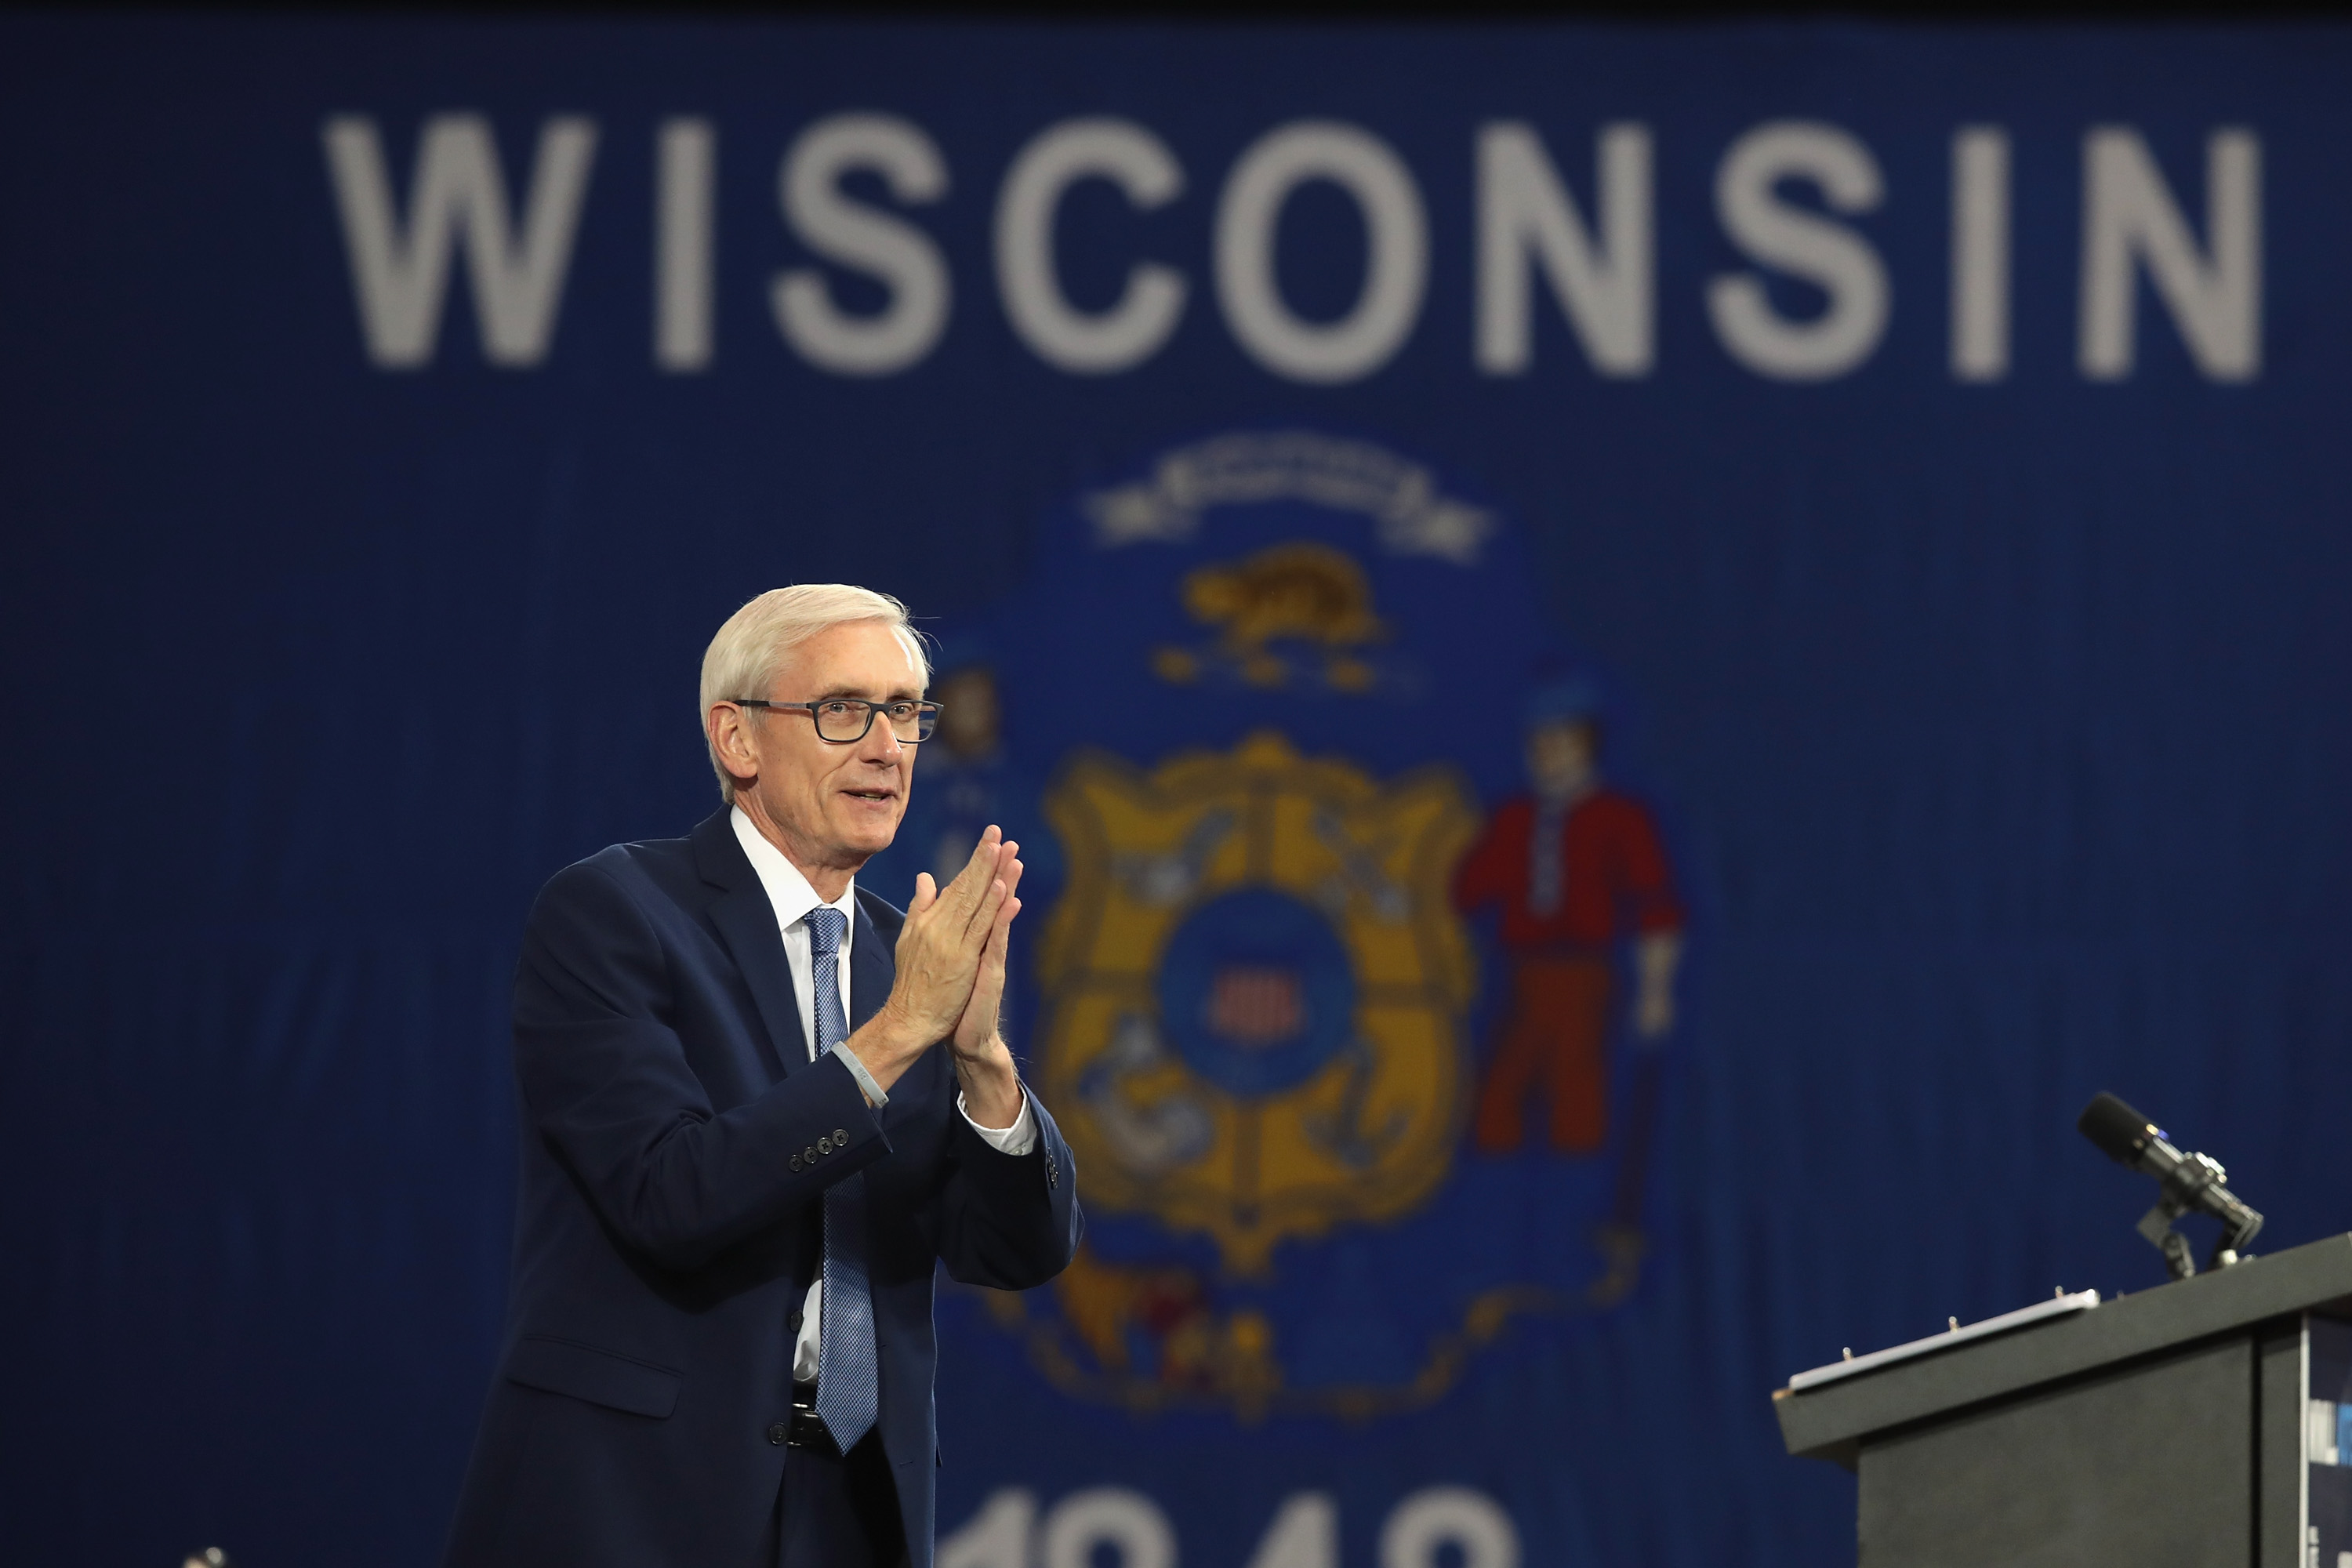  Wisconsin Governor Tony Evers (Photo by Scott Olson/Getty Images)